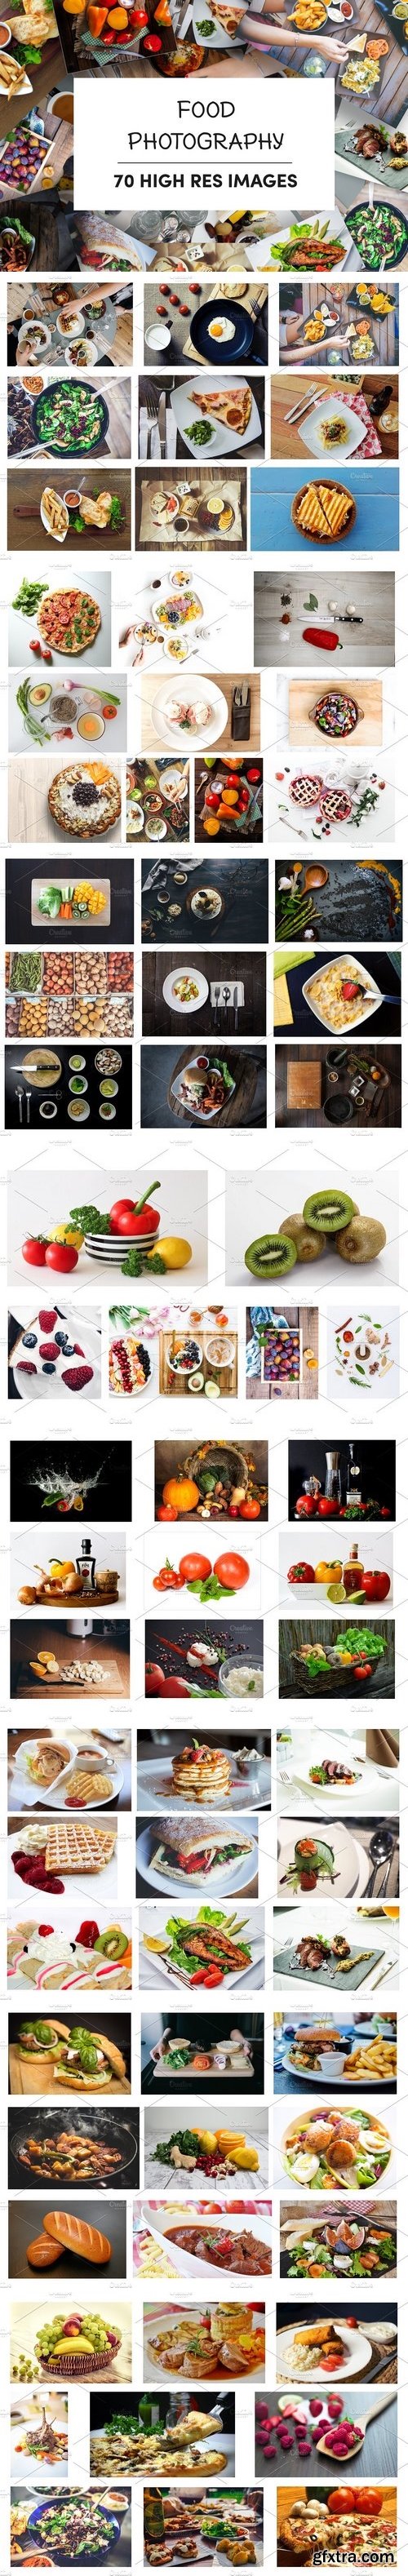 CM - 70 High Res Food Photography Images 1511456